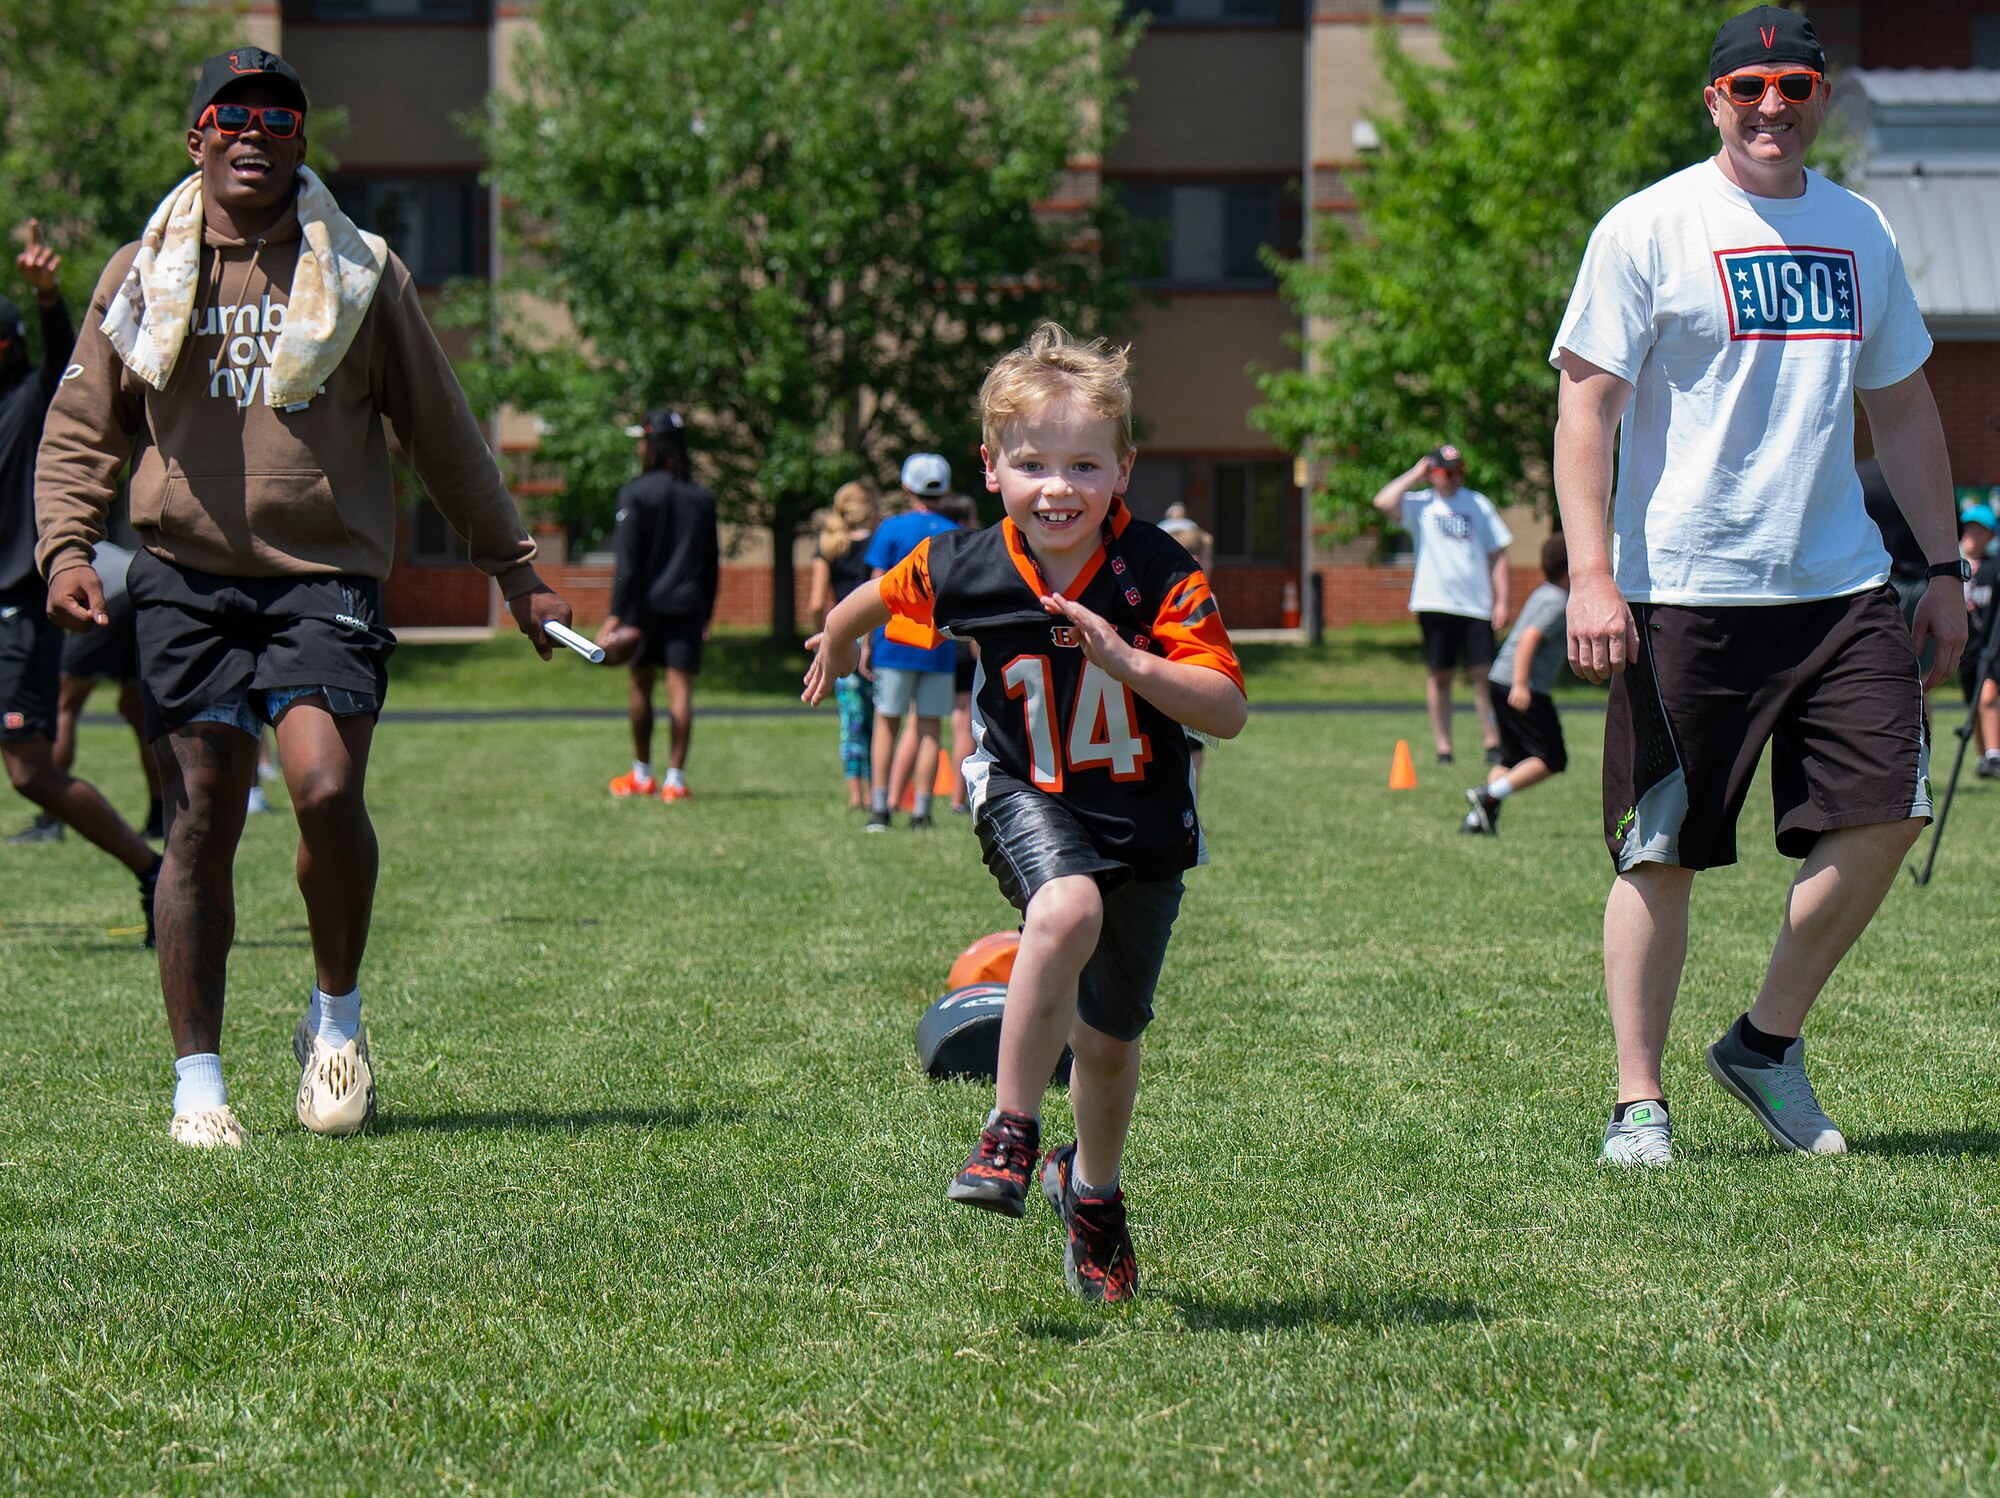 Carter Rykken, 7, sprints for the obstacle
course finish line under the eye of Cincinnati
Bengal rookie Cam Taylor-Britt (left), and a
USO volunteer during the USO-sponsored
Bengals’ skill clinic June 3, 2022, at
Wright-Patterson Air Force Base, Ohio.
Rykken was one of the 99 Wright-Patt youths
who got the chance to learn from the football
pros. (U.S. Air Force photo by R.J. Oriez)